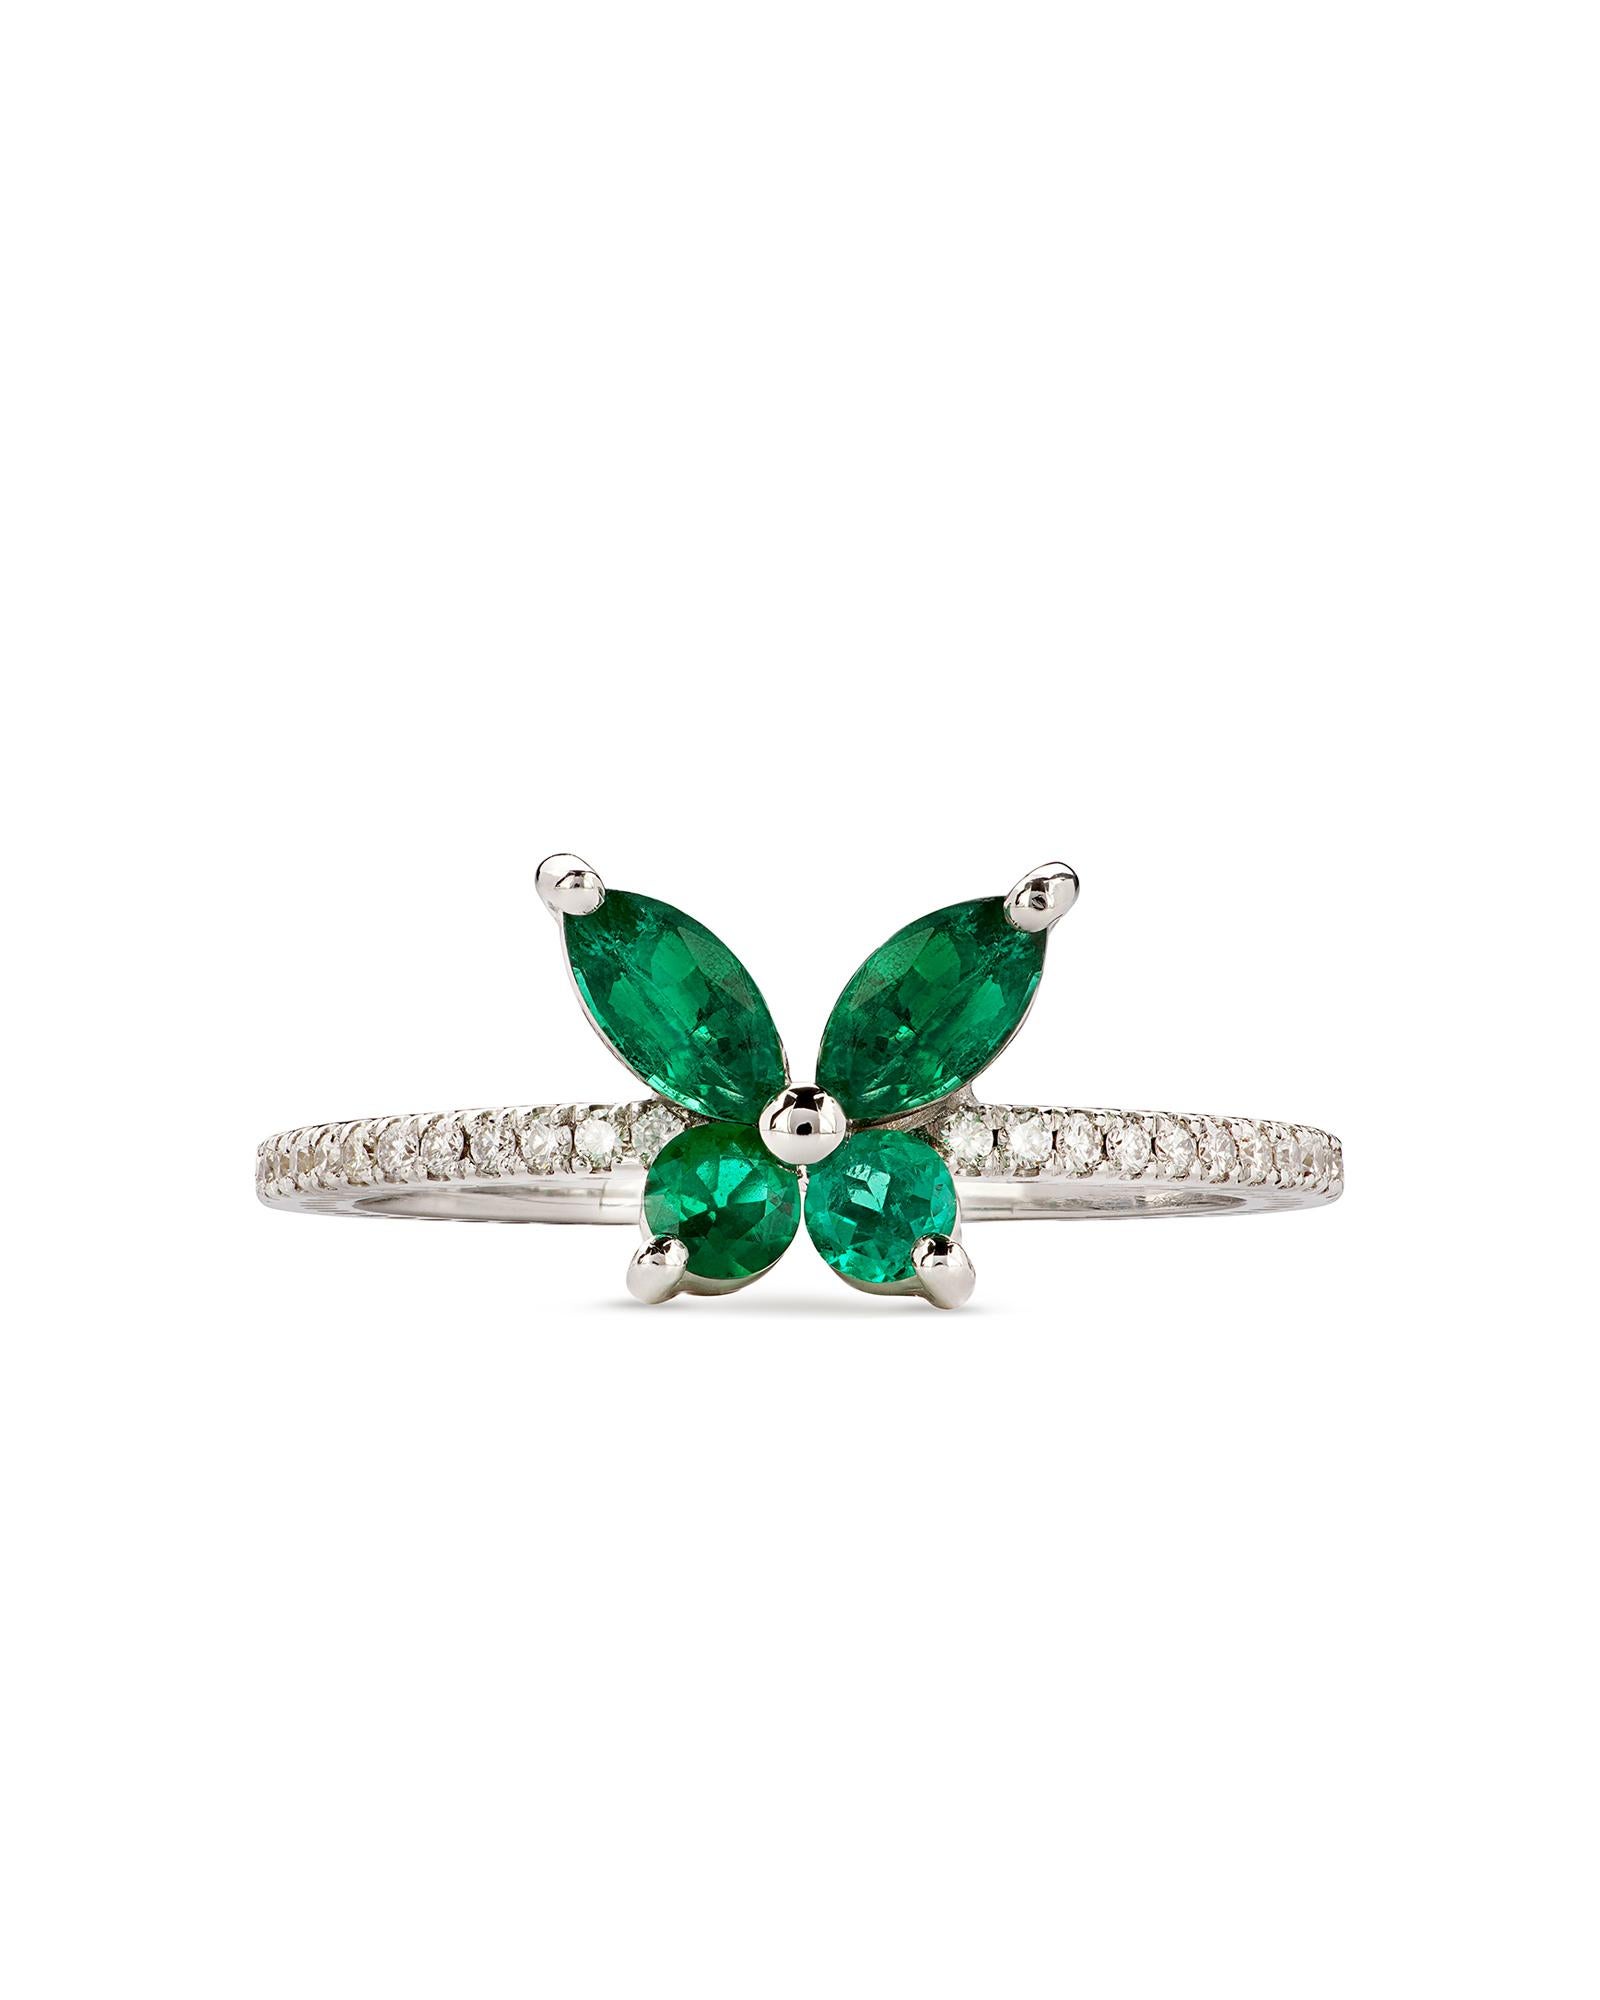 This ring in white gold belongs to the Butterfly collection. The diamonds embellish the ring and illuminate the central butterfly in emeralds that are revealed in all its romantic shine.

Butterfly Ring in white gold, emeralds, and